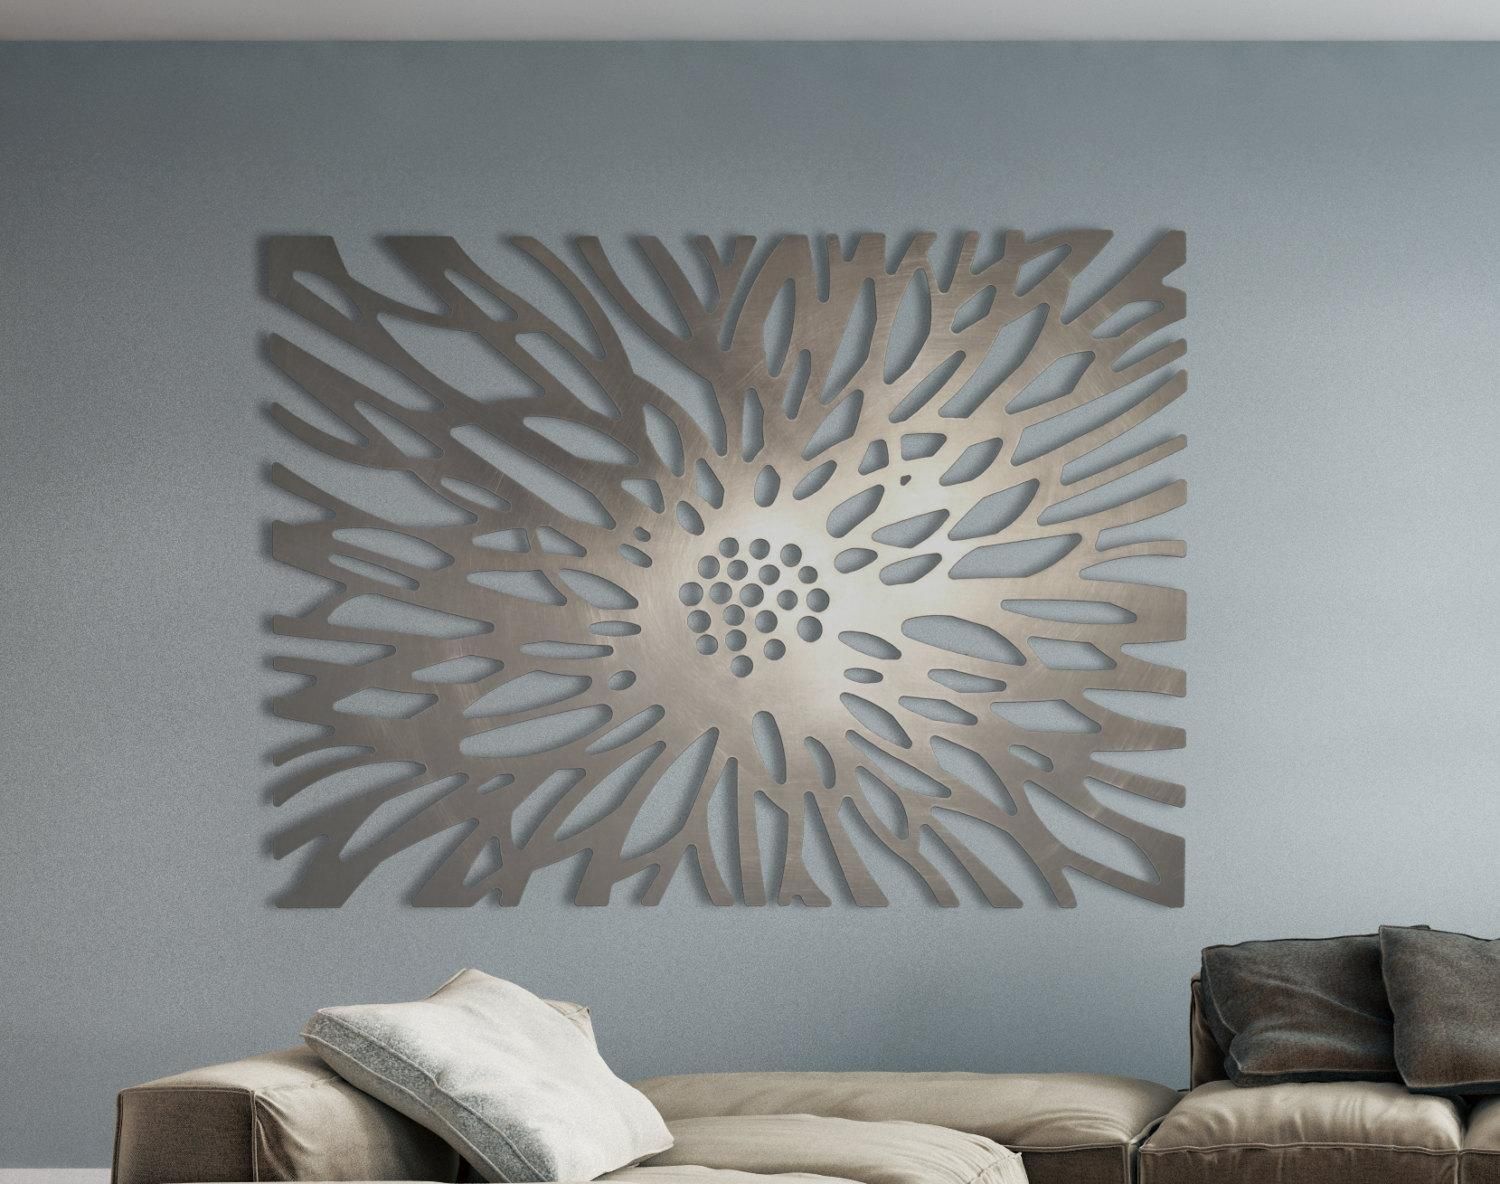 Laser Cut Metal Decorative Wall Art Panel Sculpture For Home Intended For Metal Wall Art Outdoor Use (View 4 of 20)